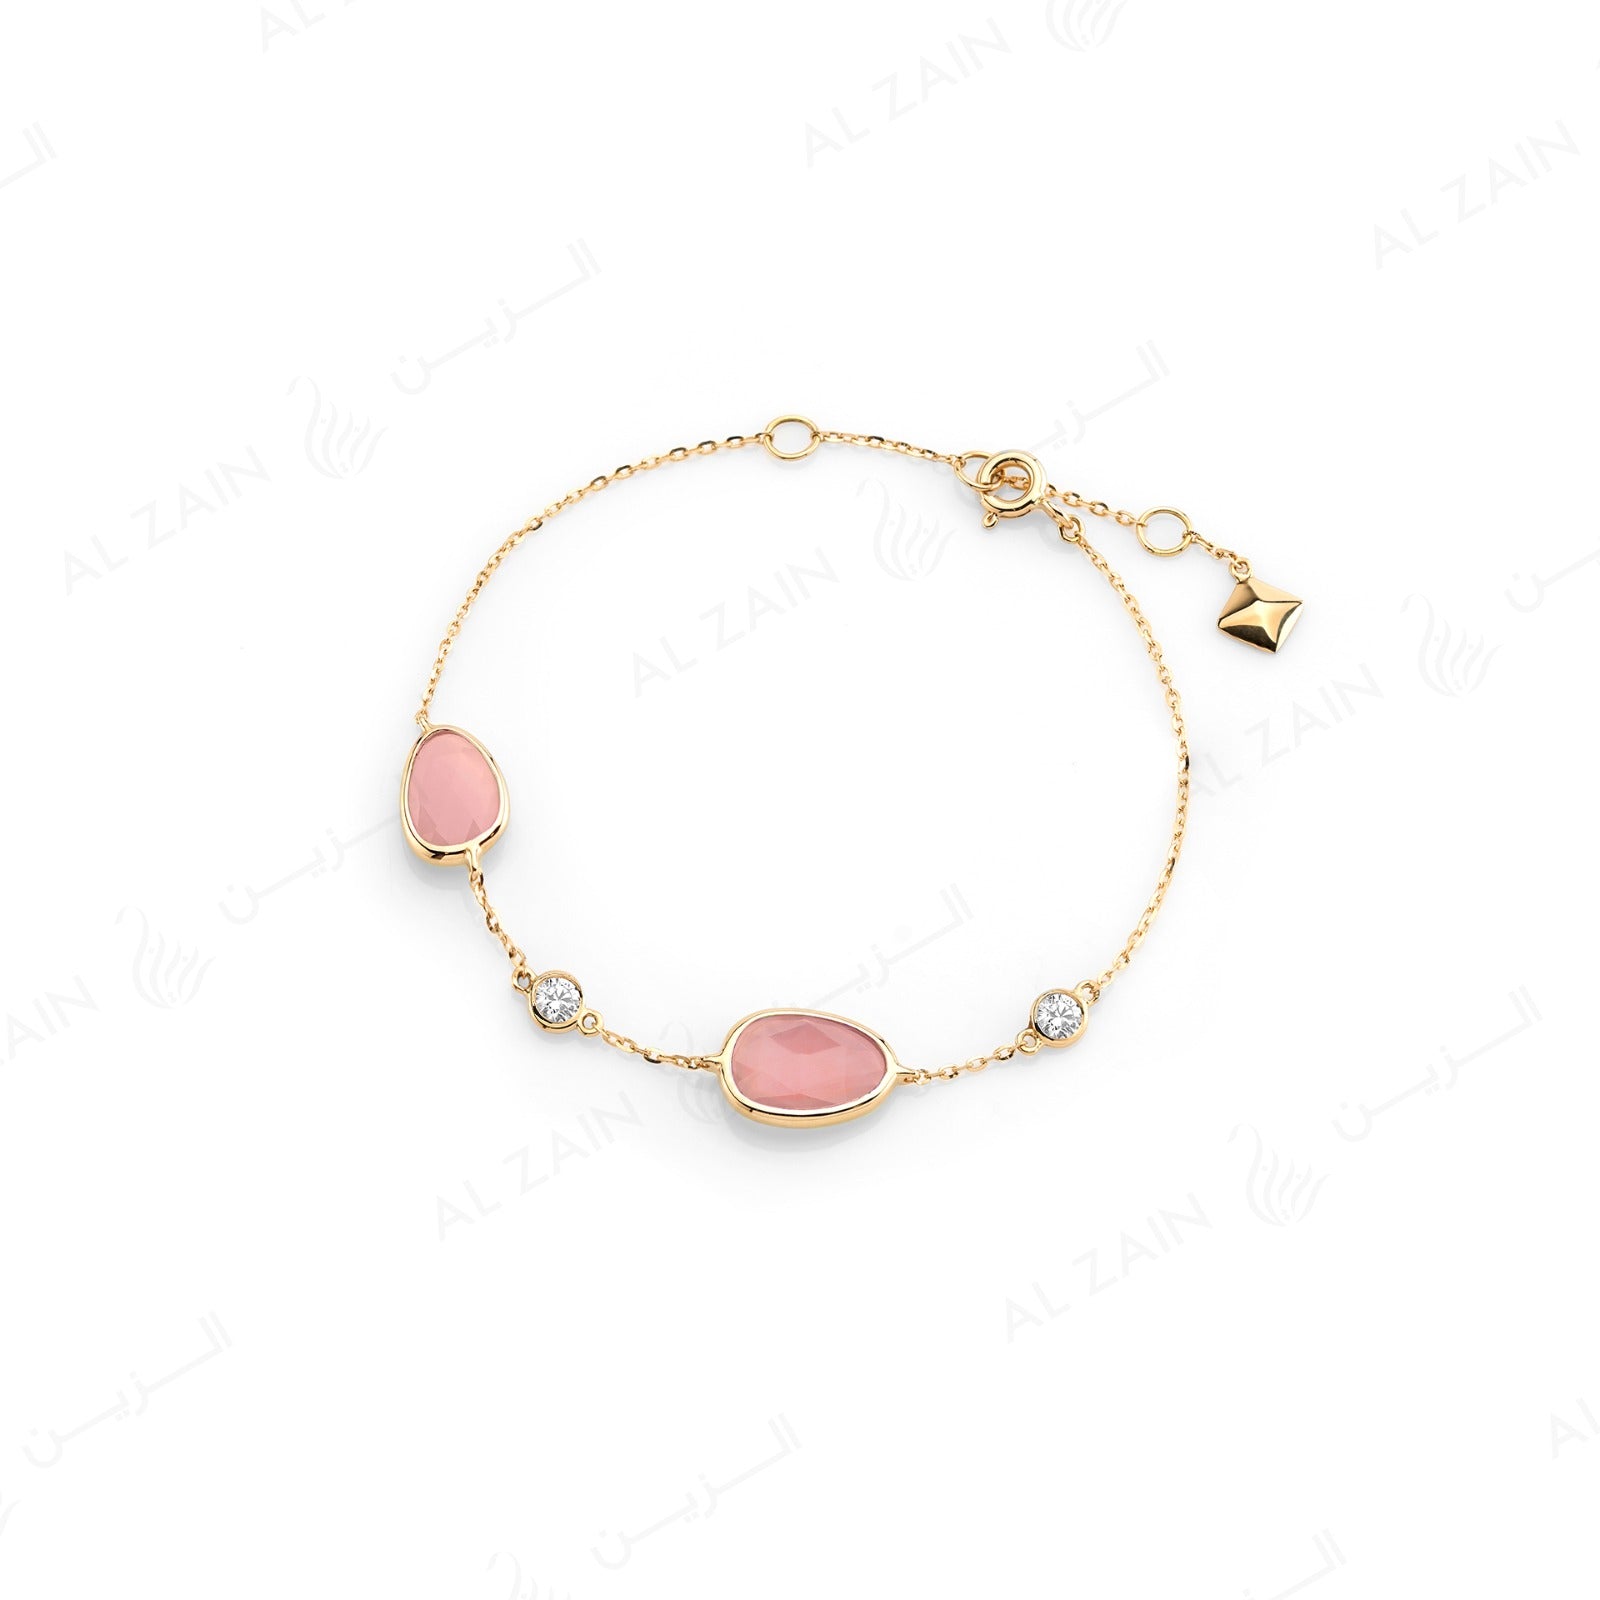 Simply Nina bracelet in 18k yellow gold with Pink Opal stones and diamonds